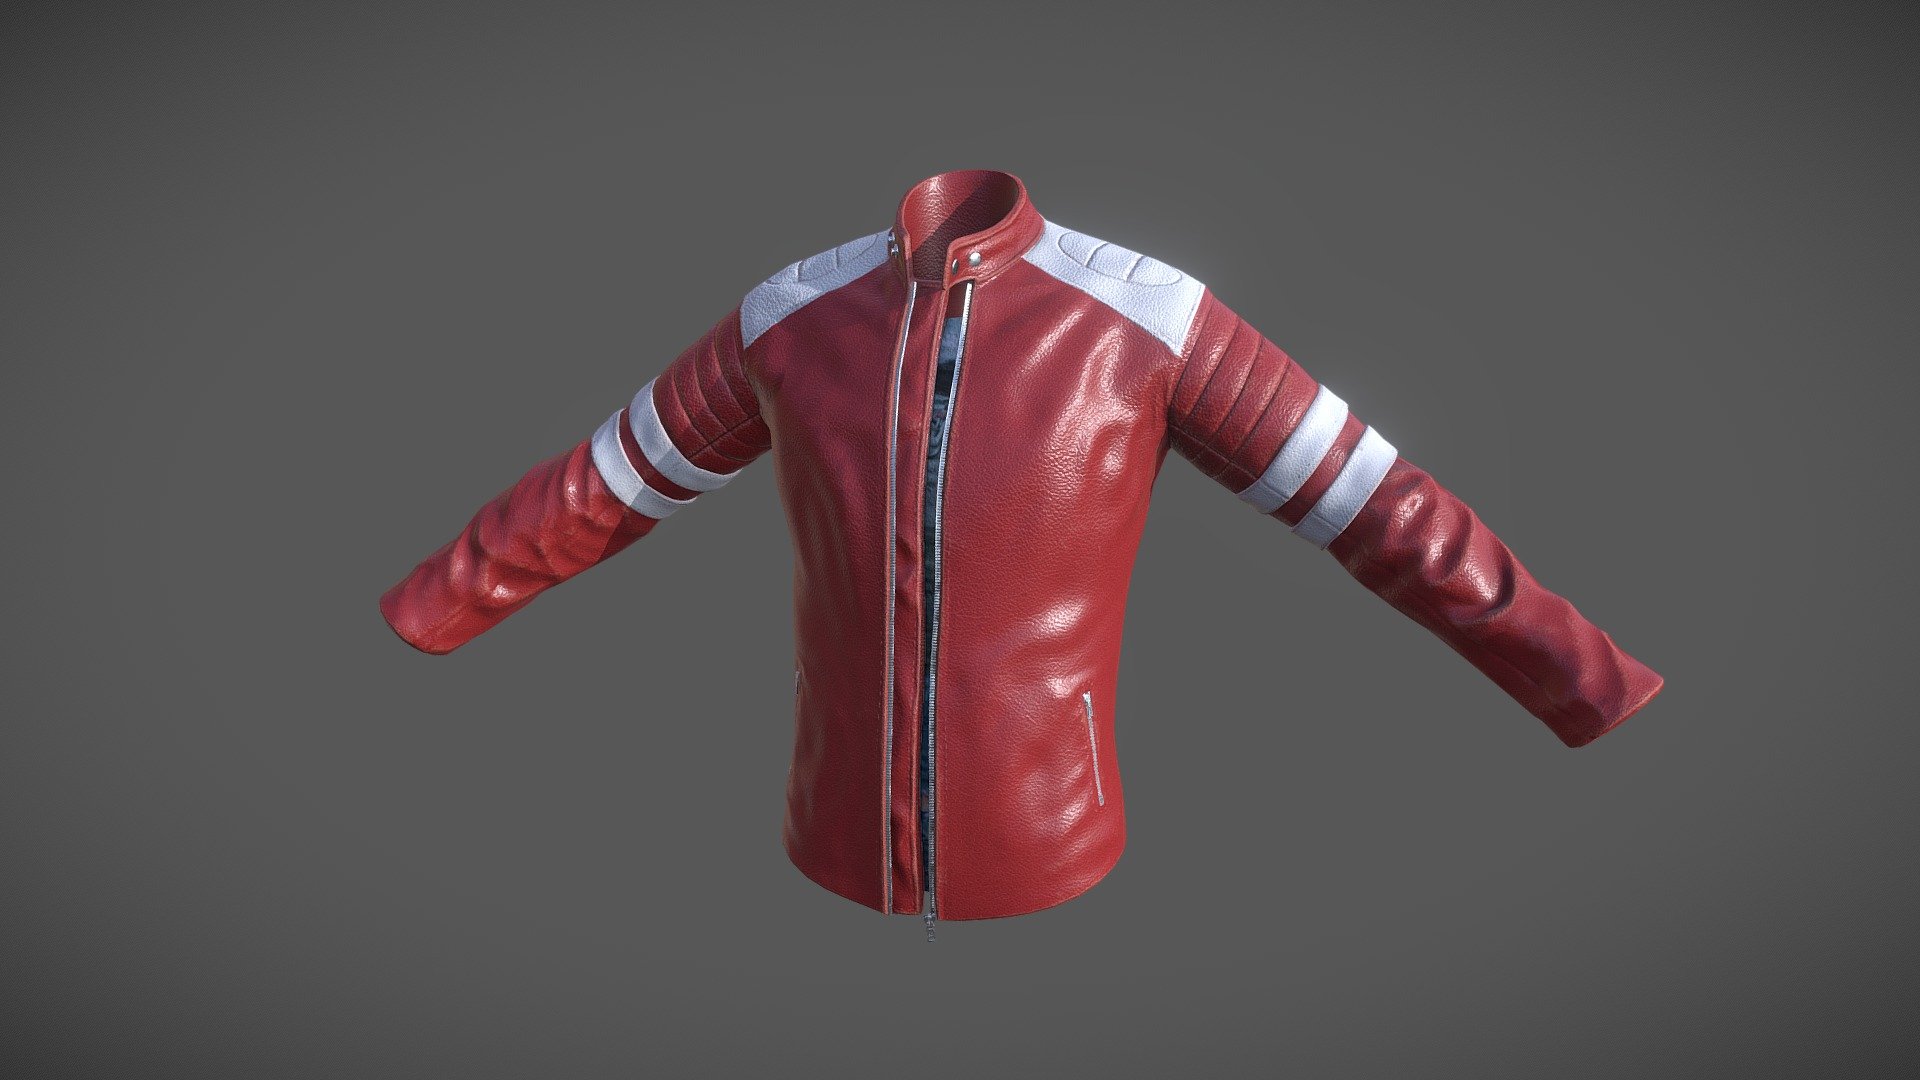 This was a jacket I made for my advanced game characters class at Full Sail University. It's from one of my favorite films, Fight Club. It was modeled in Maya, refined in zbrush, and textured and baked in Substance Painter 3d model